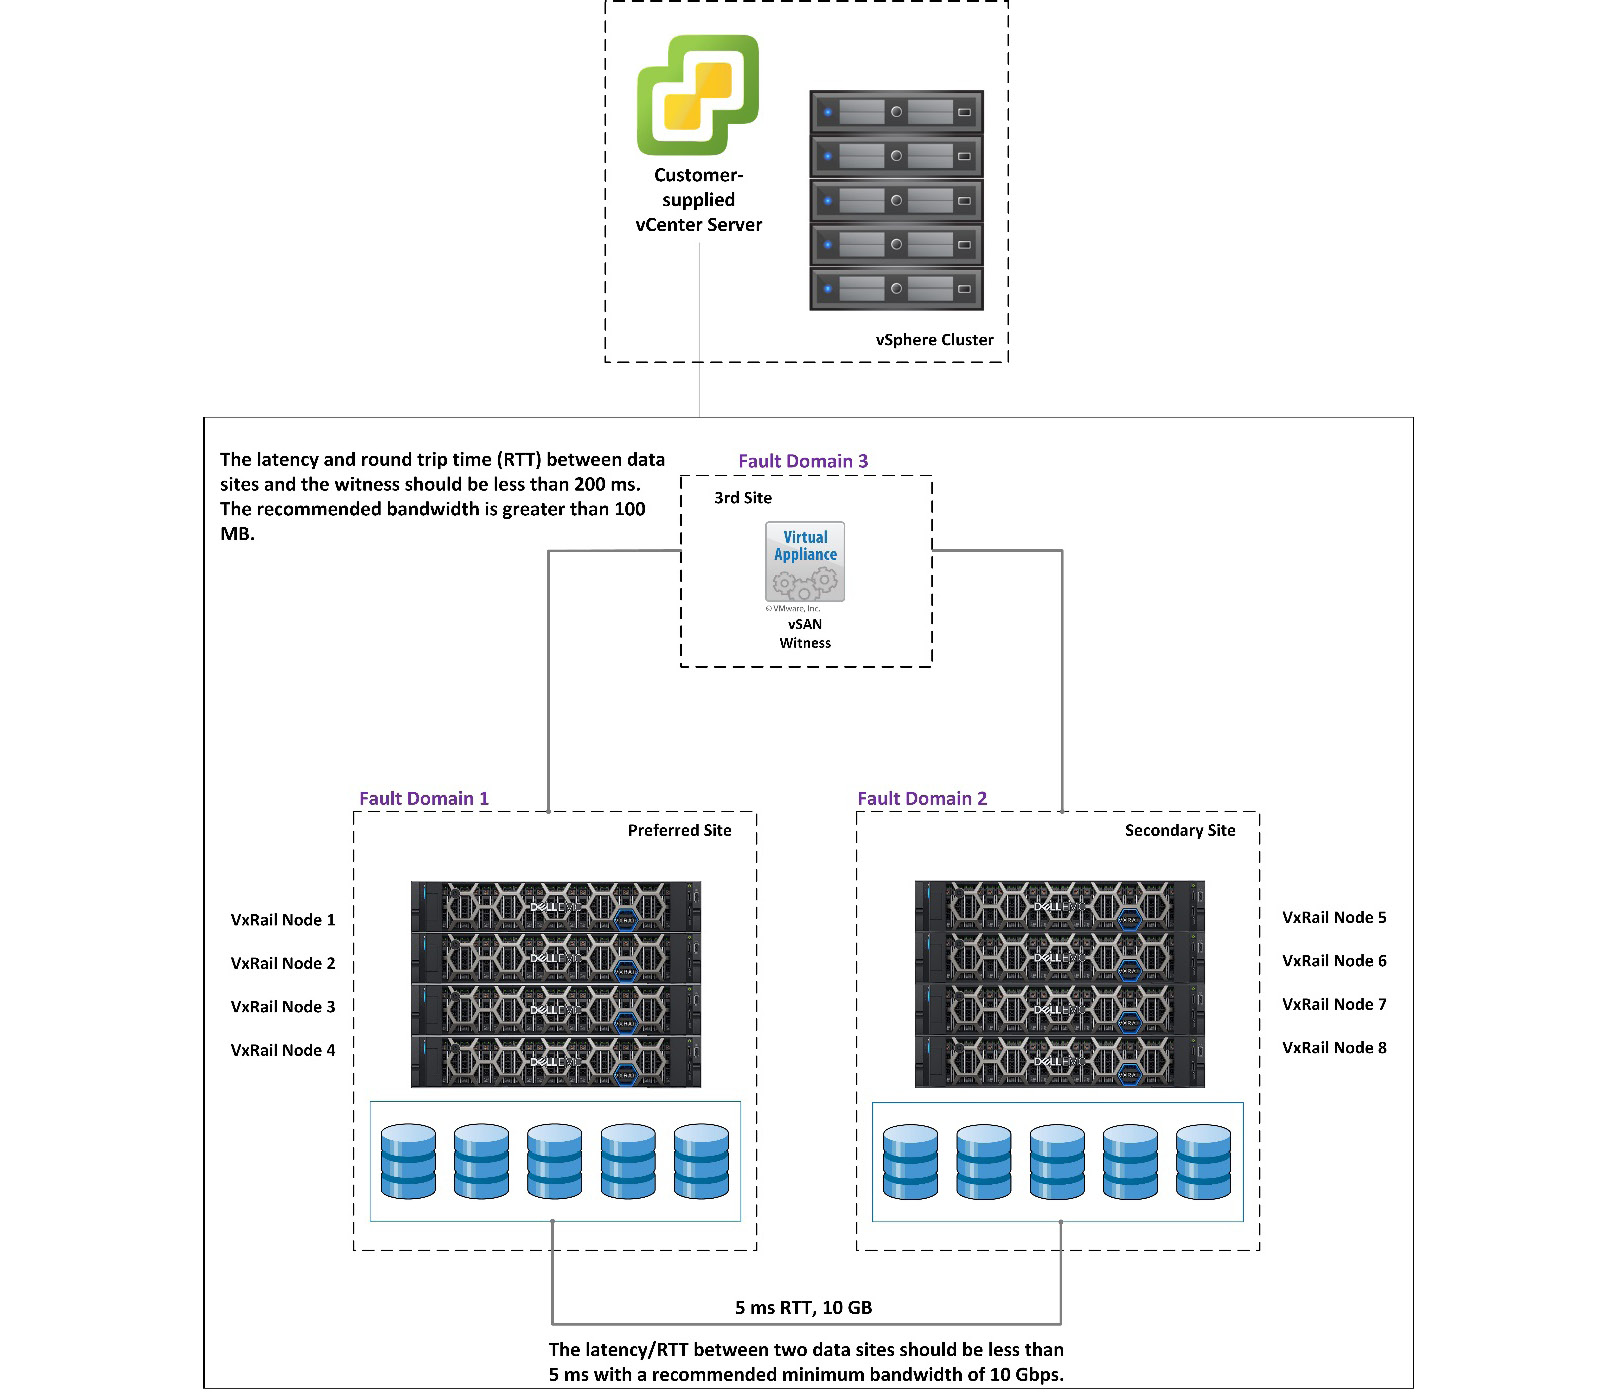 Figure 7.11 – VxRail Stretched Cluster with the customer-supplied vCenter Server instance
